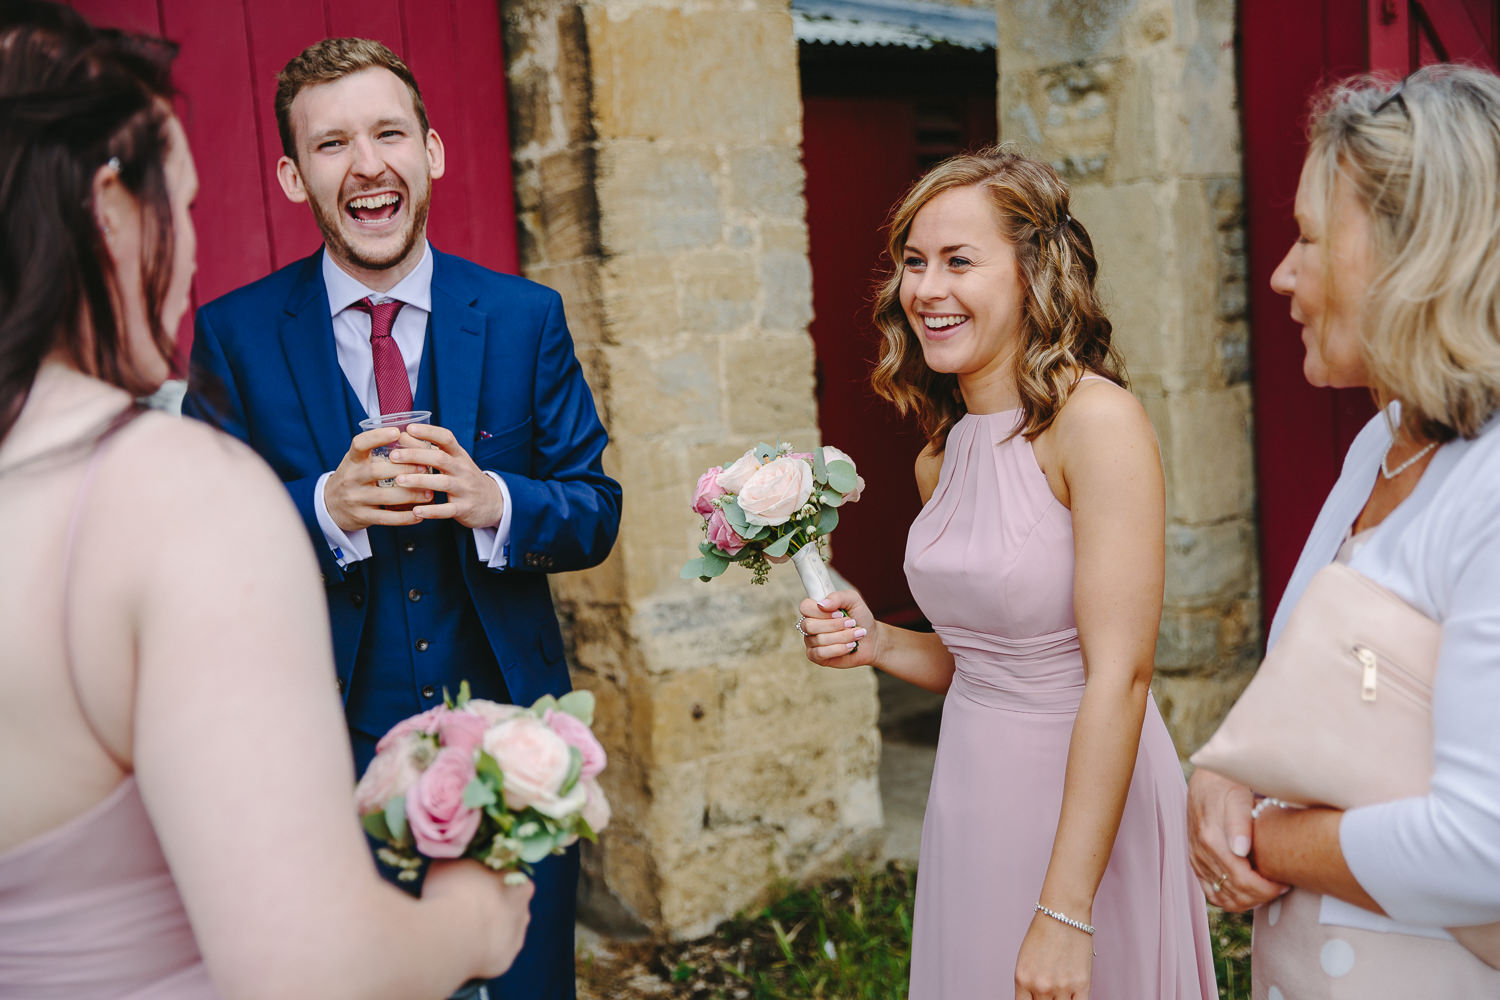 Bridesmaids and guests laughing during a wedding reception.